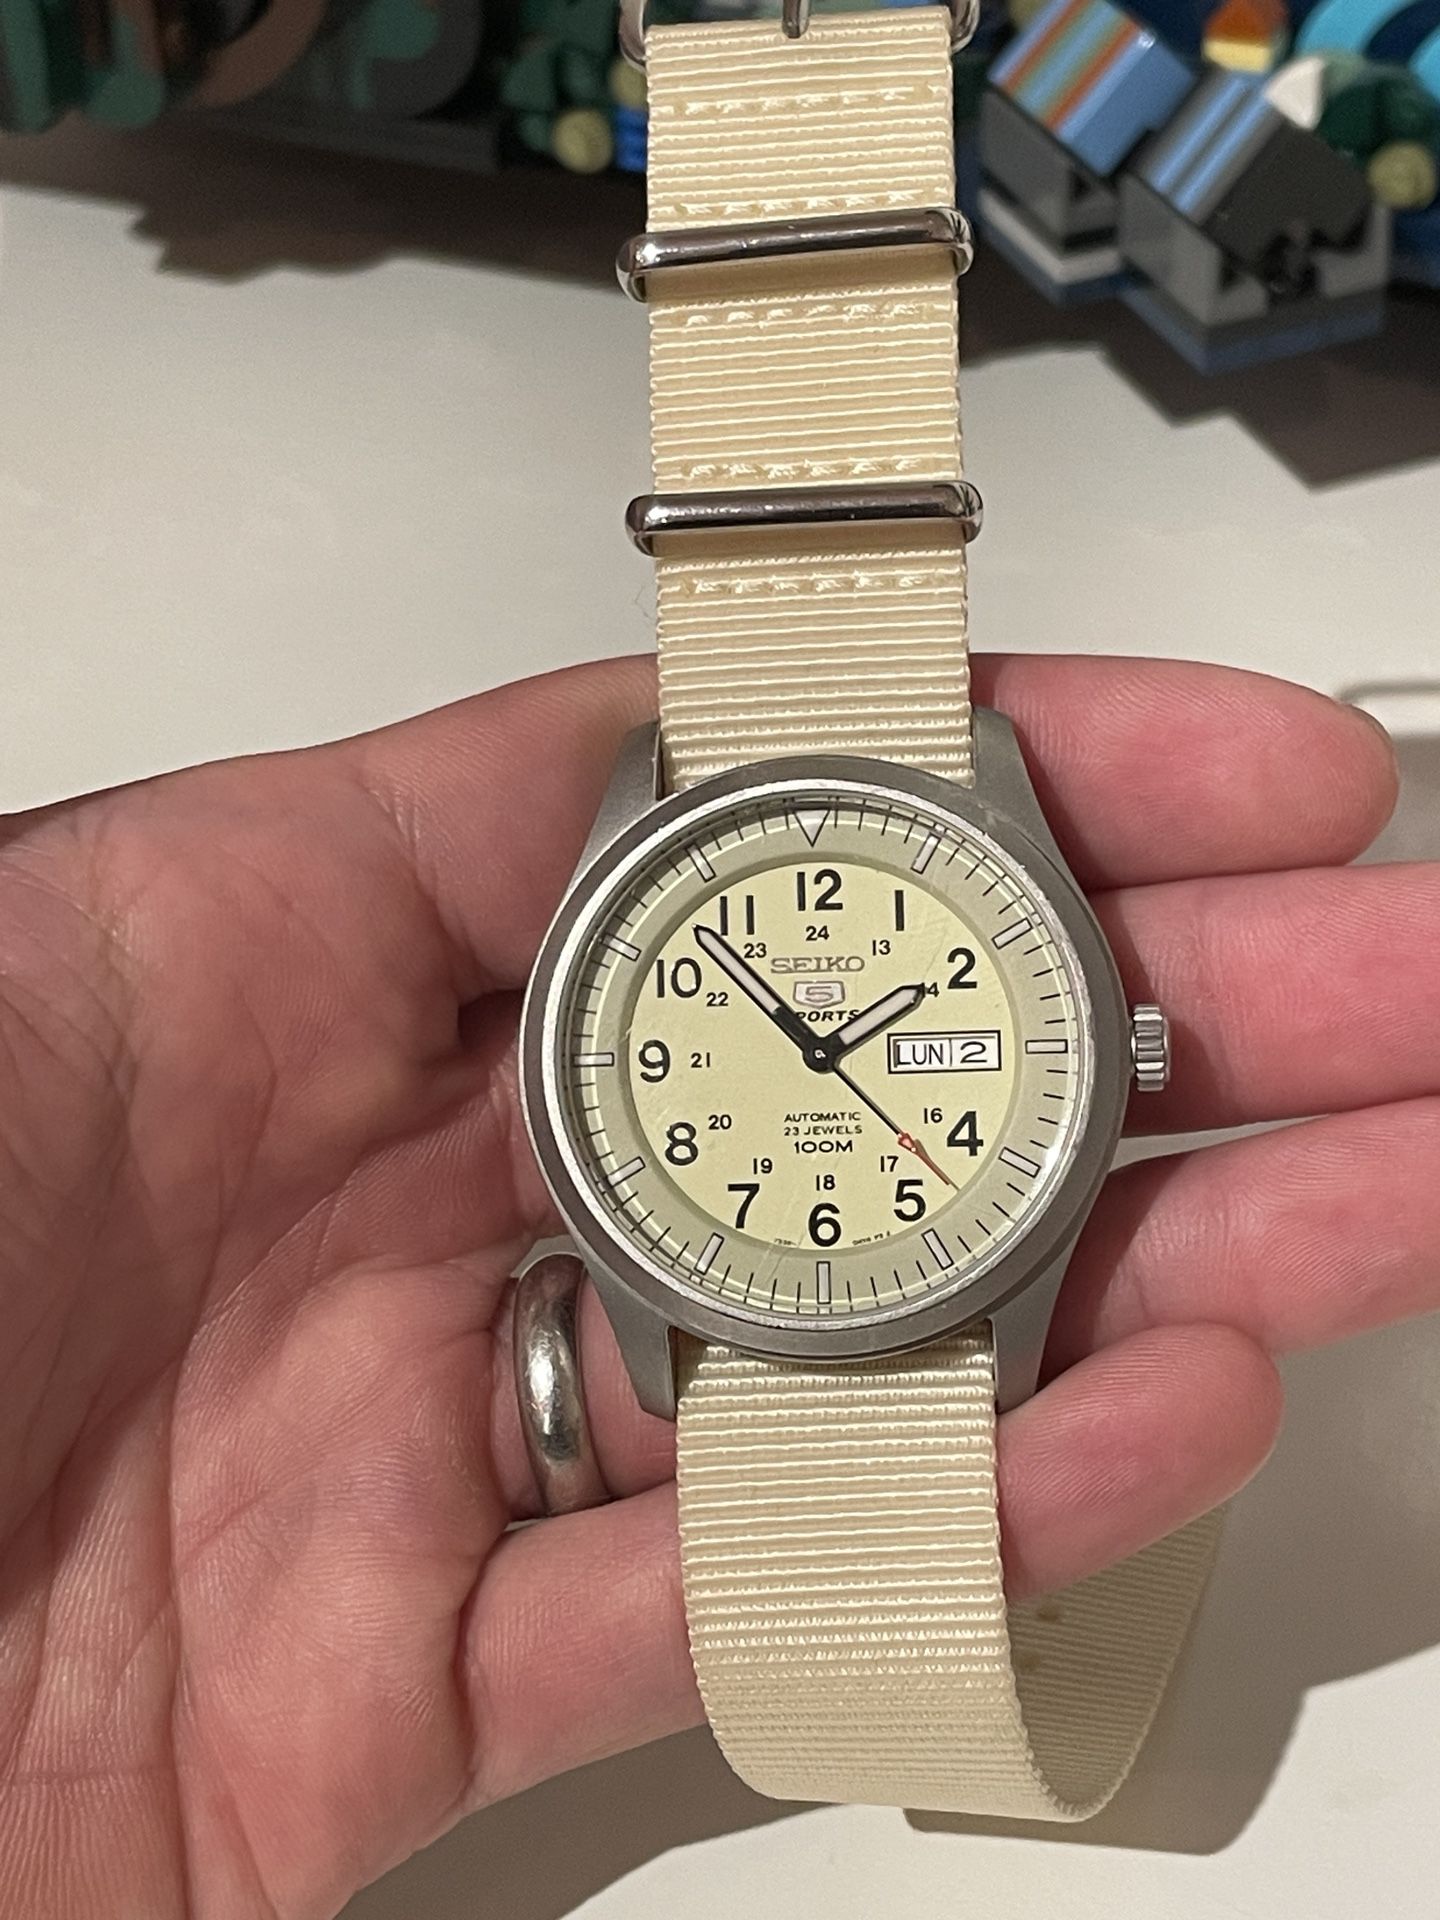 Seiko 5 Sport Automatic Watch for Sale in San Diego, CA - OfferUp